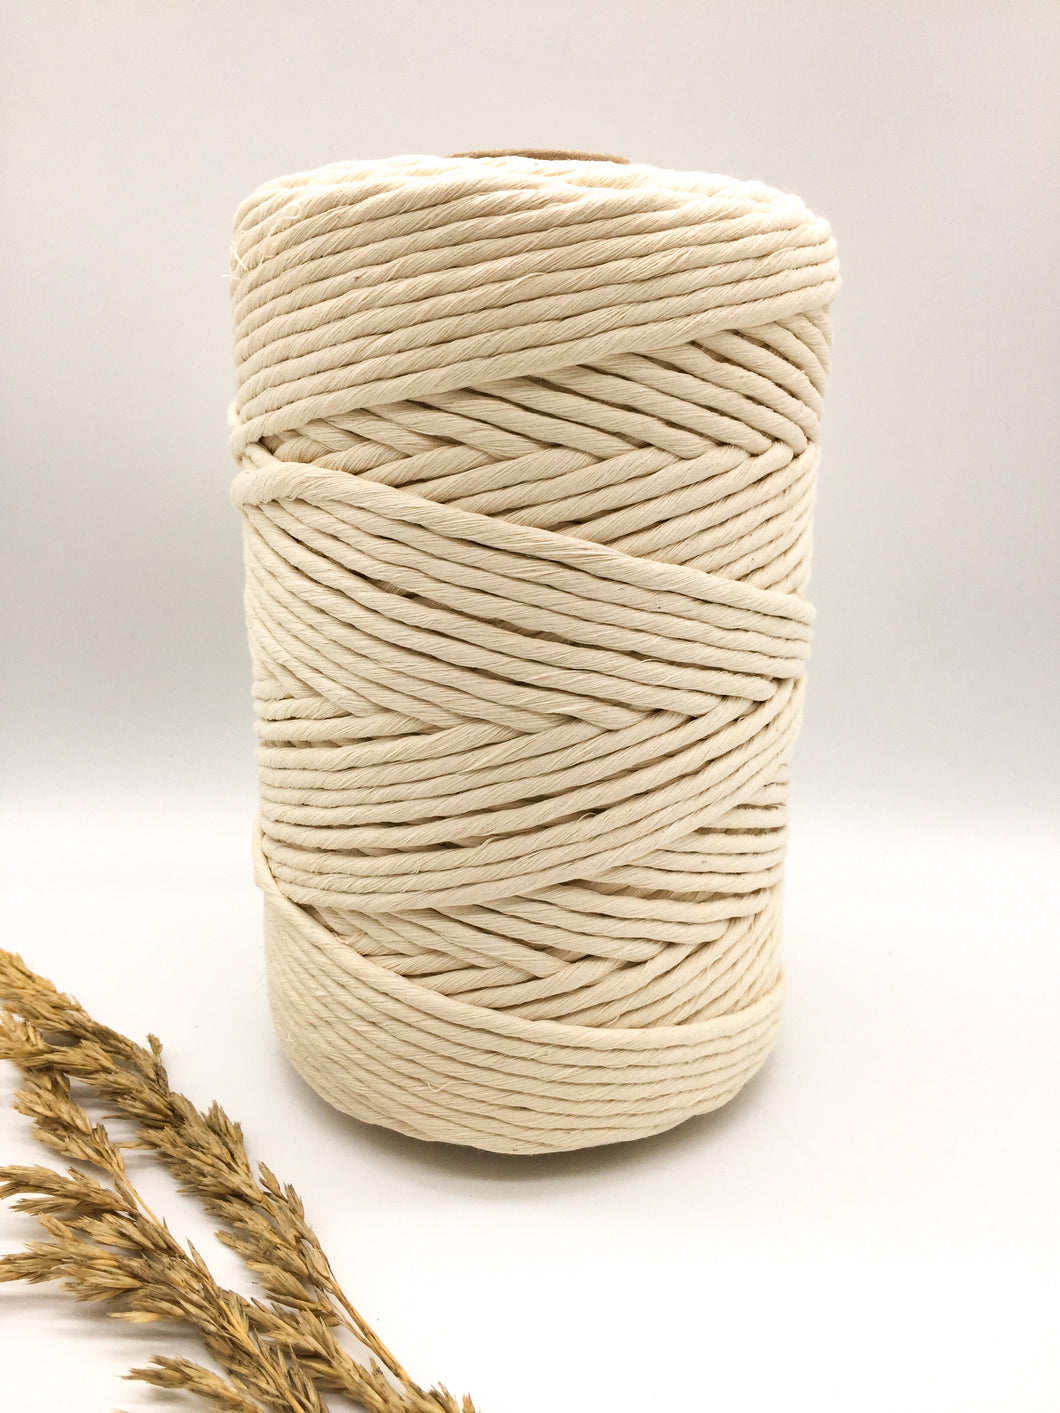 5mm NATURAL single twist cotton string - Clover Creations UK